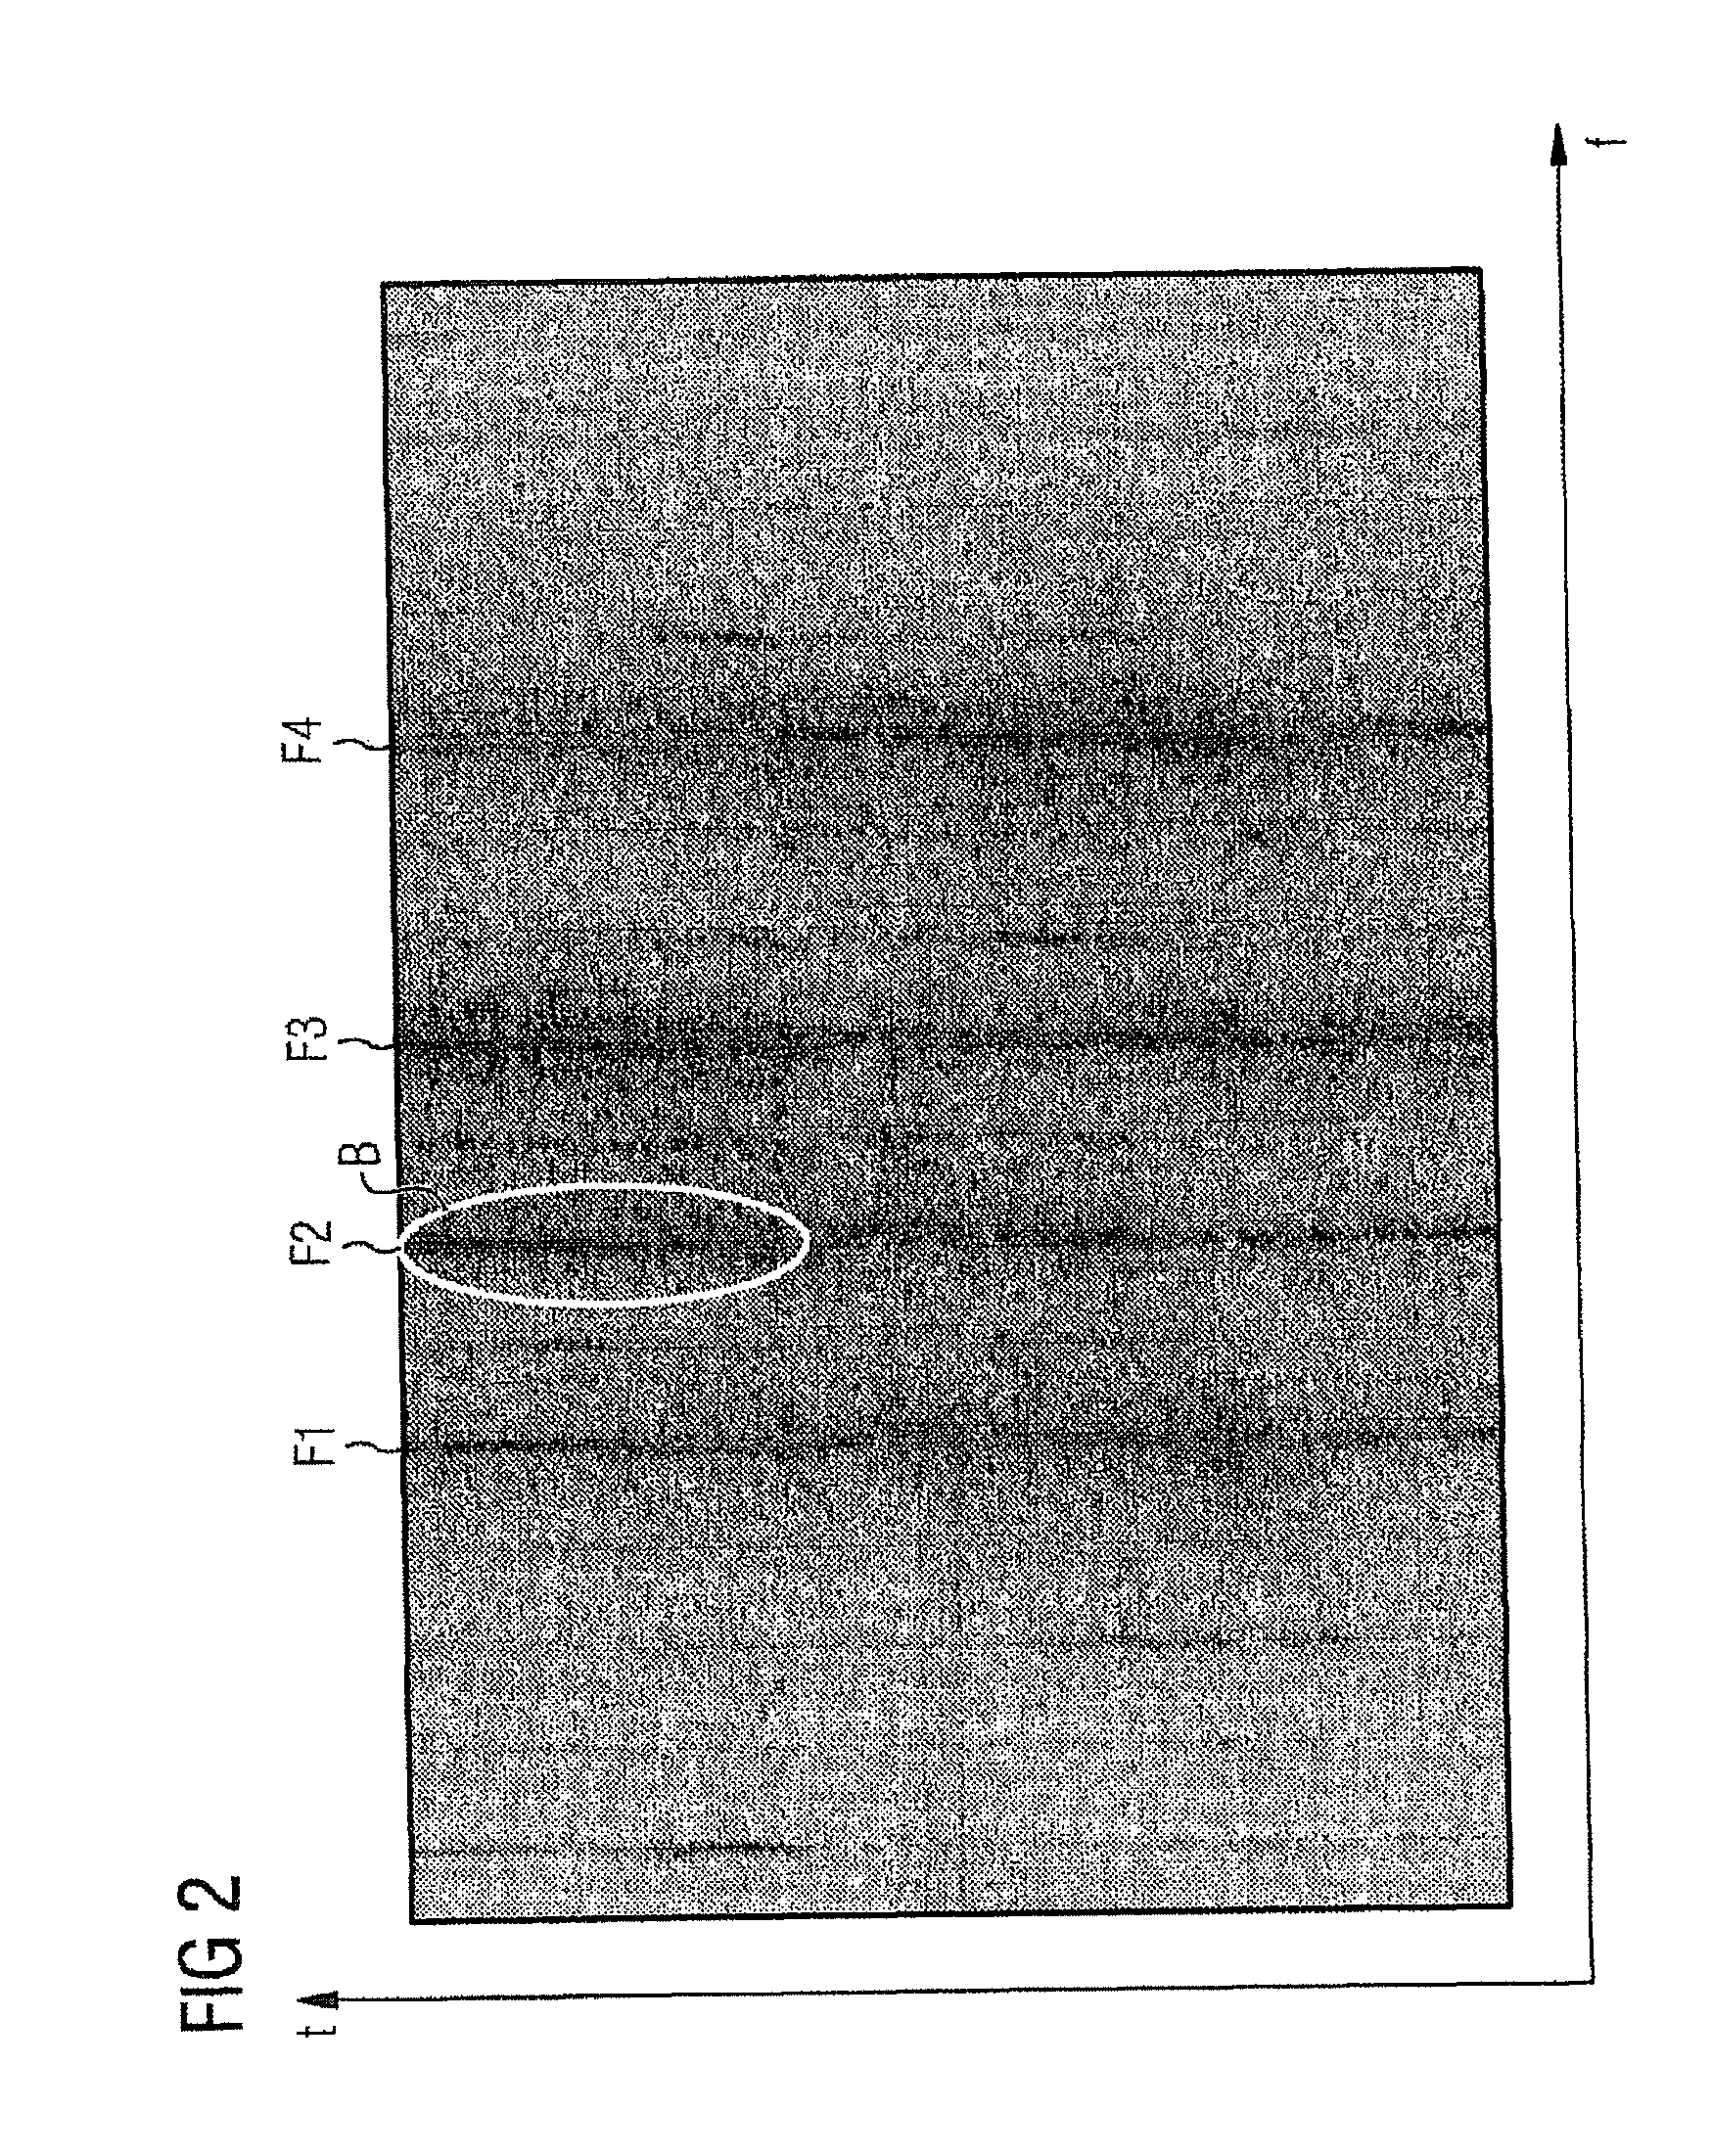 Method for analysis of the operation of a gas turbine